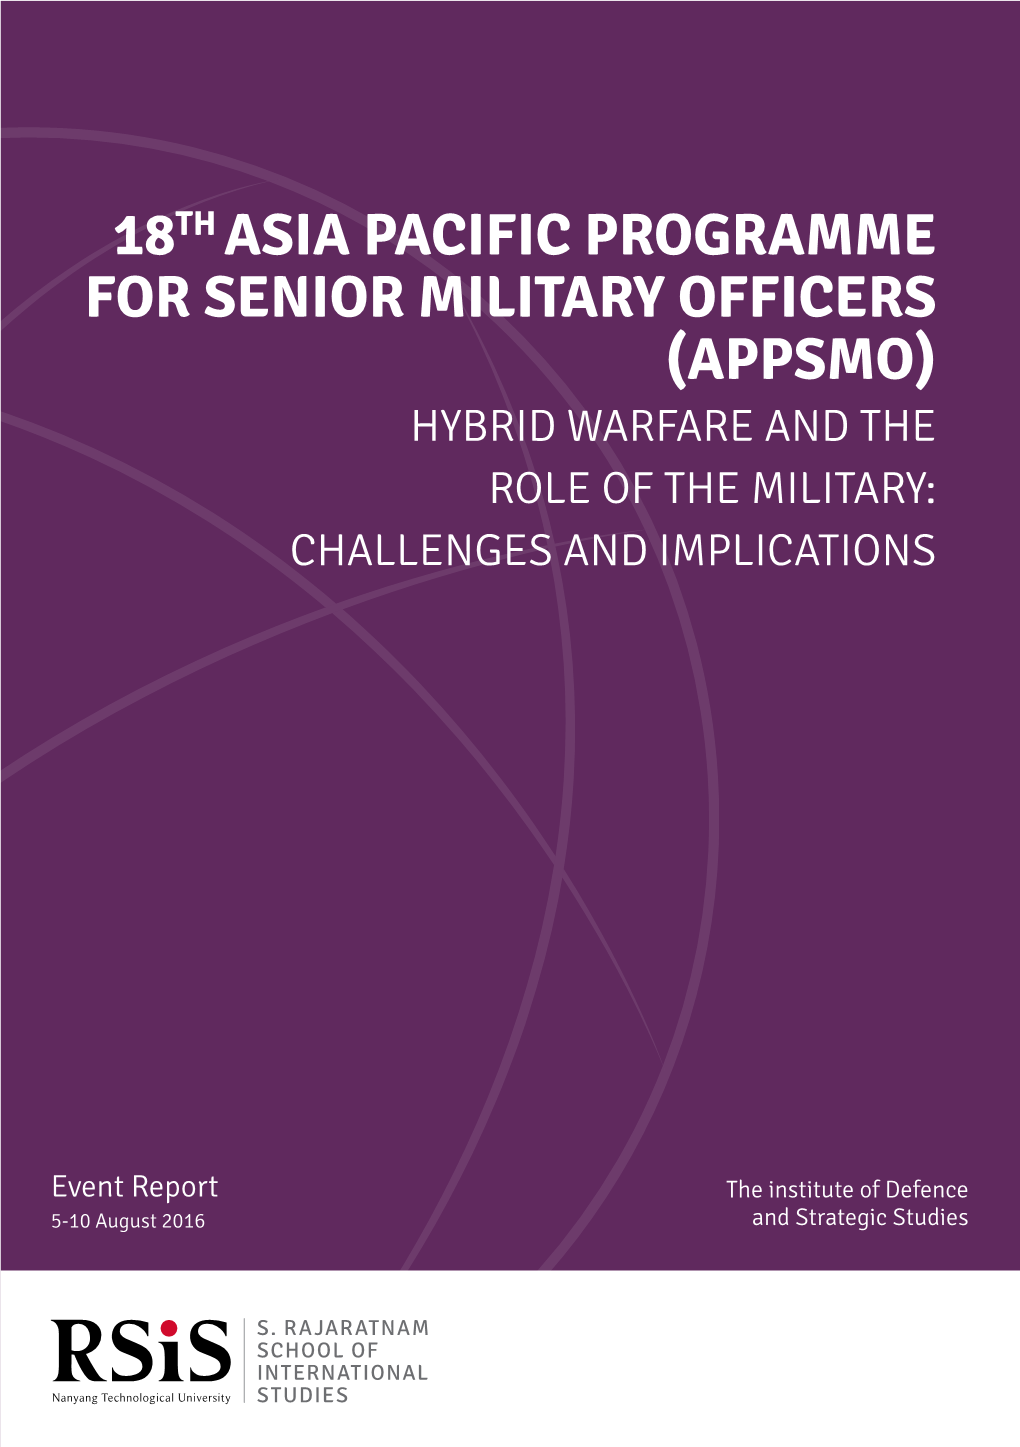 18Th Asia Pacific Programme for Senior Military Officers (Appsmo) Hybrid Warfare and the Role of the Military: Challenges and Implications